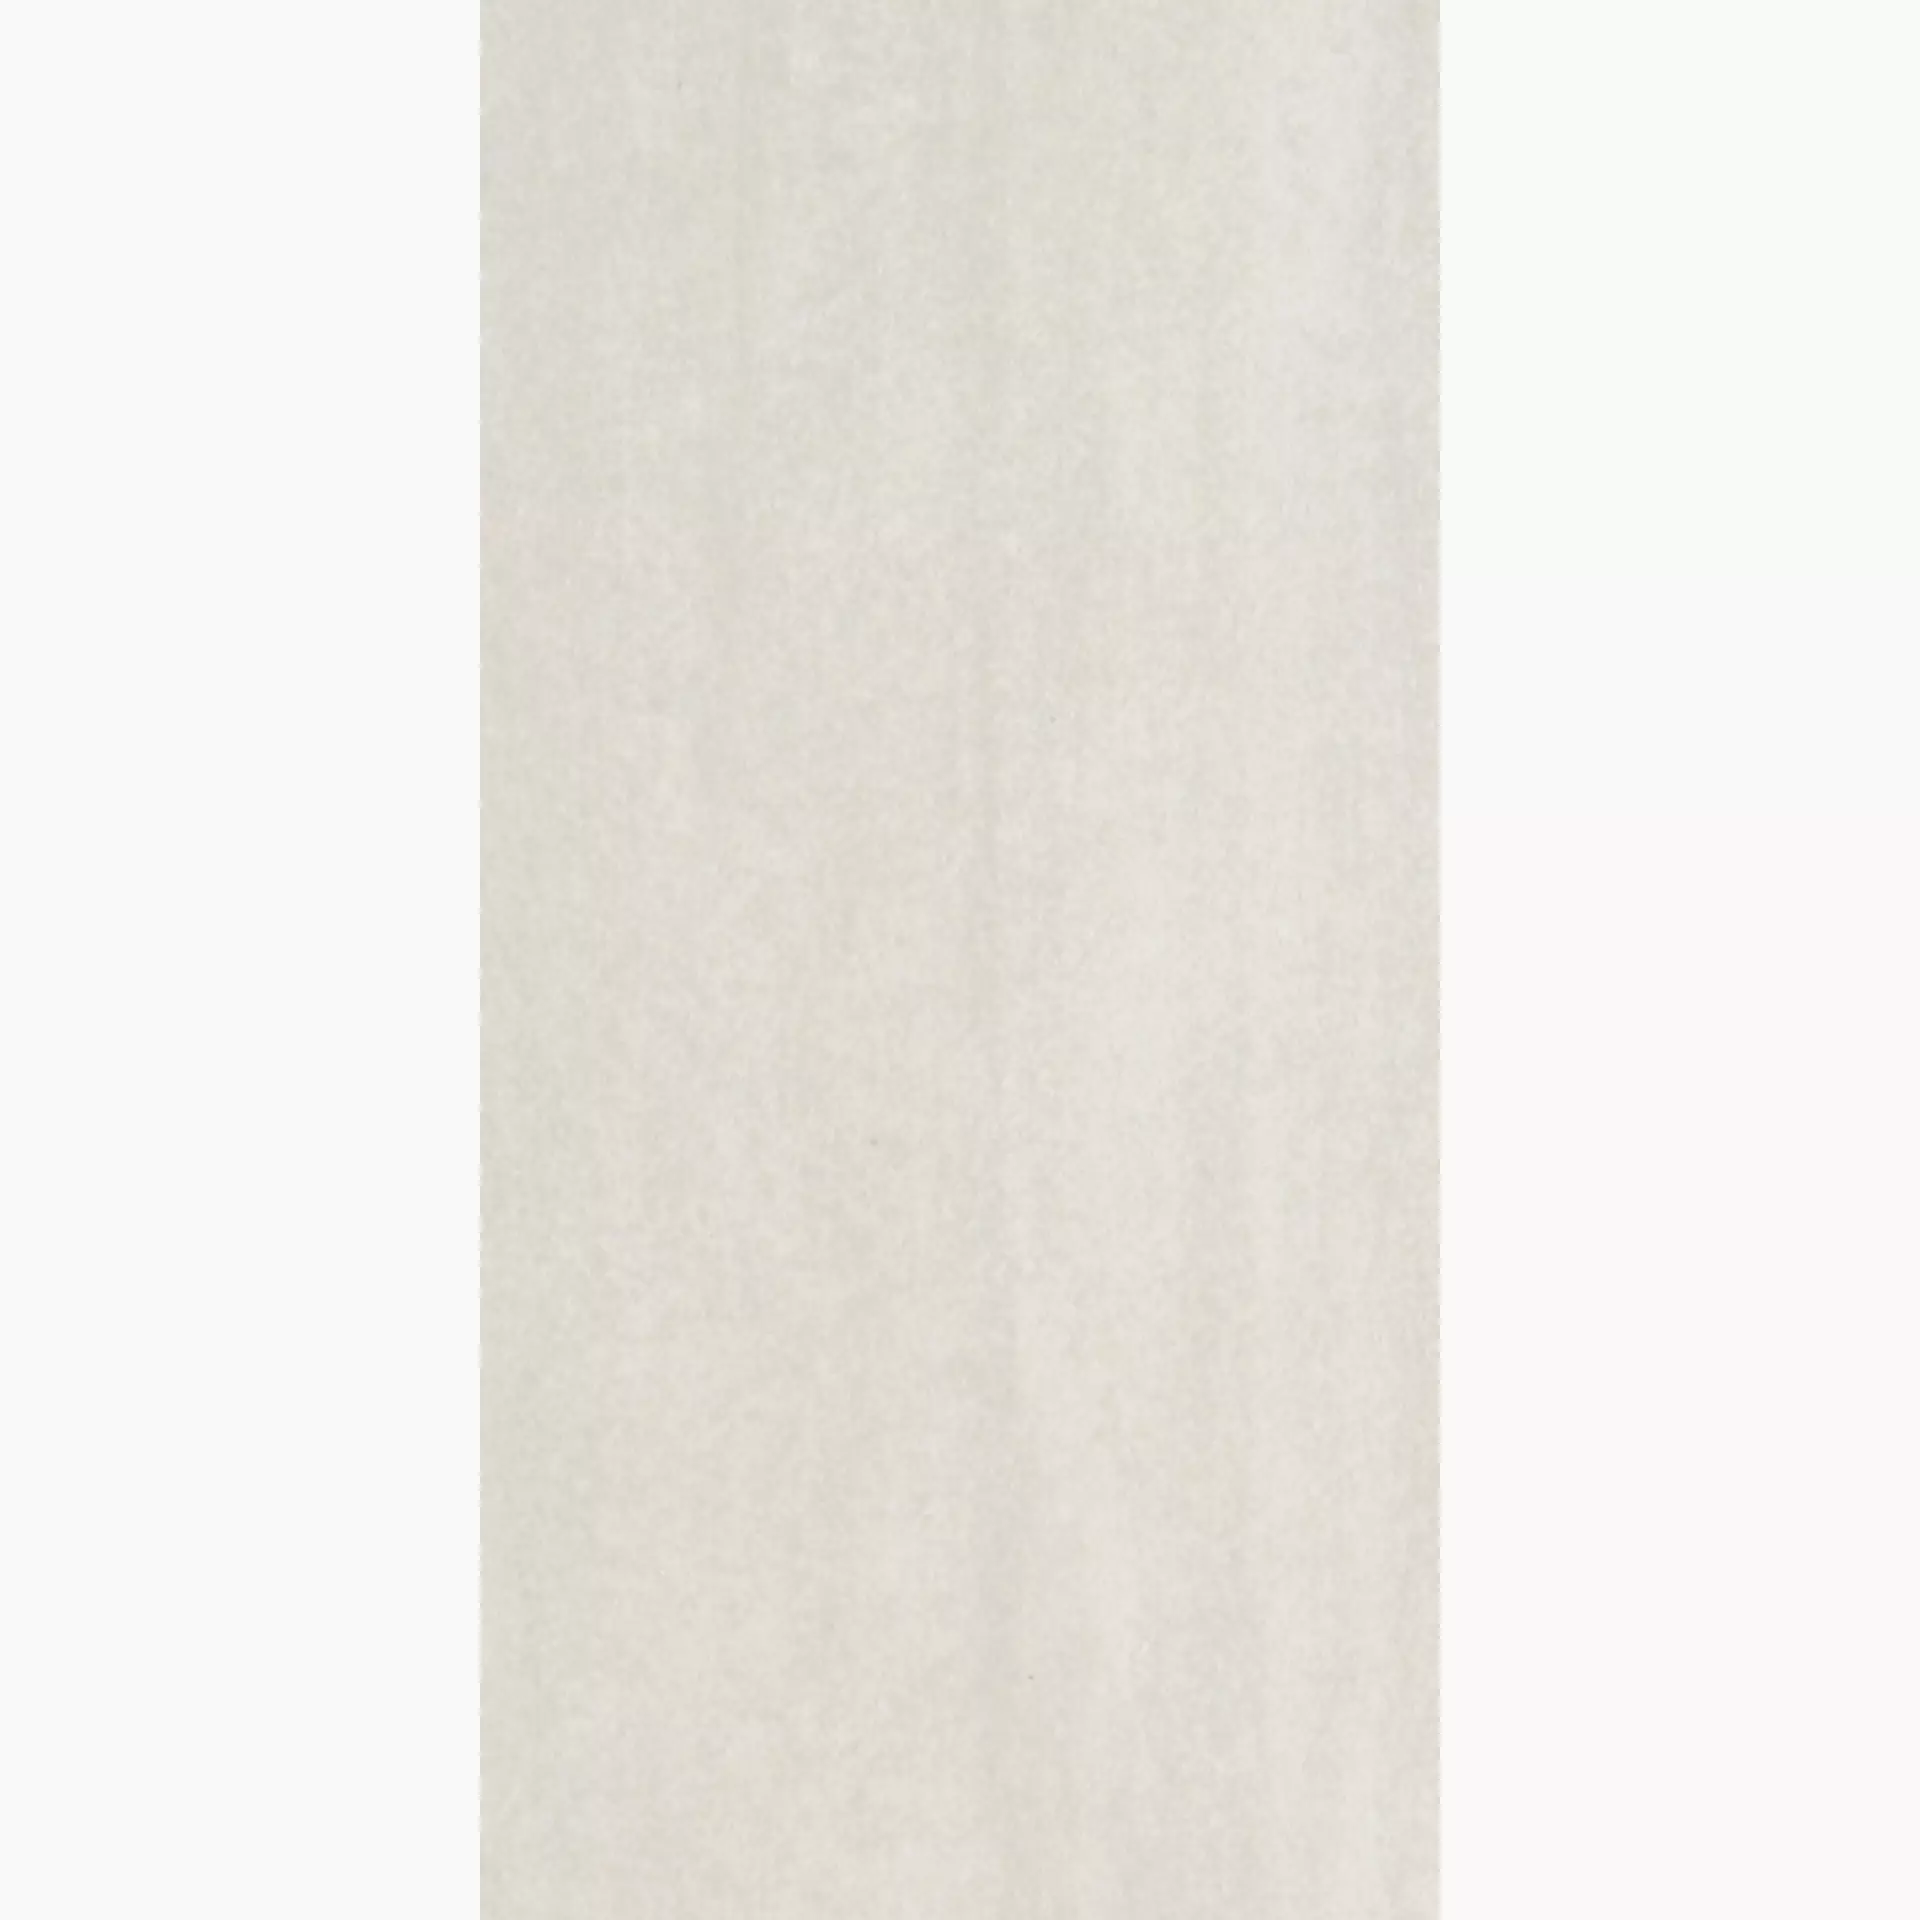 Rondine Contract Ivory Naturale J83702 30,5x60,5cm 8,5mm